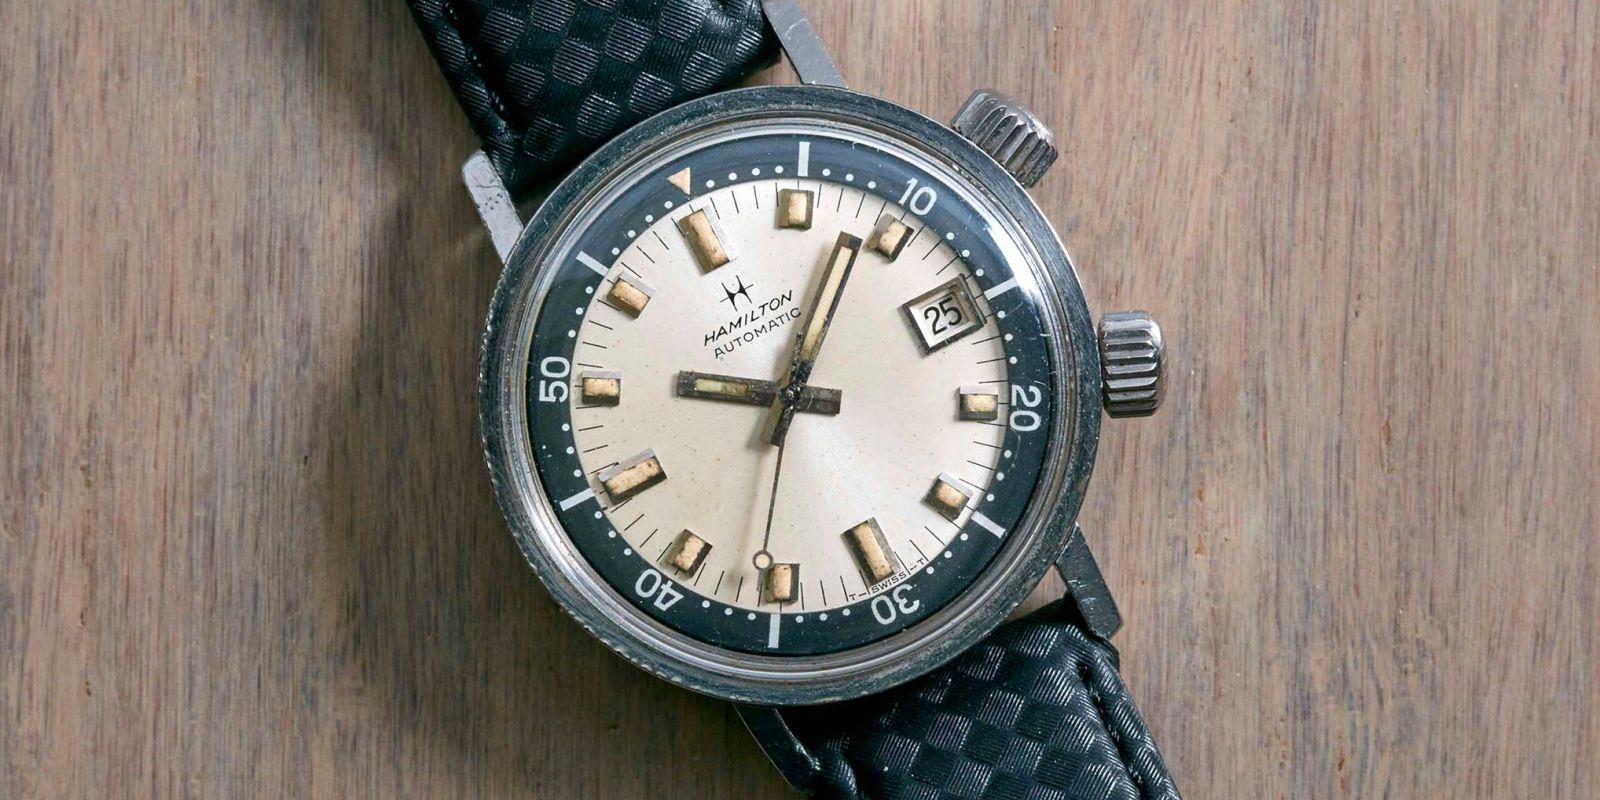 Watch Review - Recommended vintage watch brands for a watch enthusiast ~  1930s to 1960s - YouTube